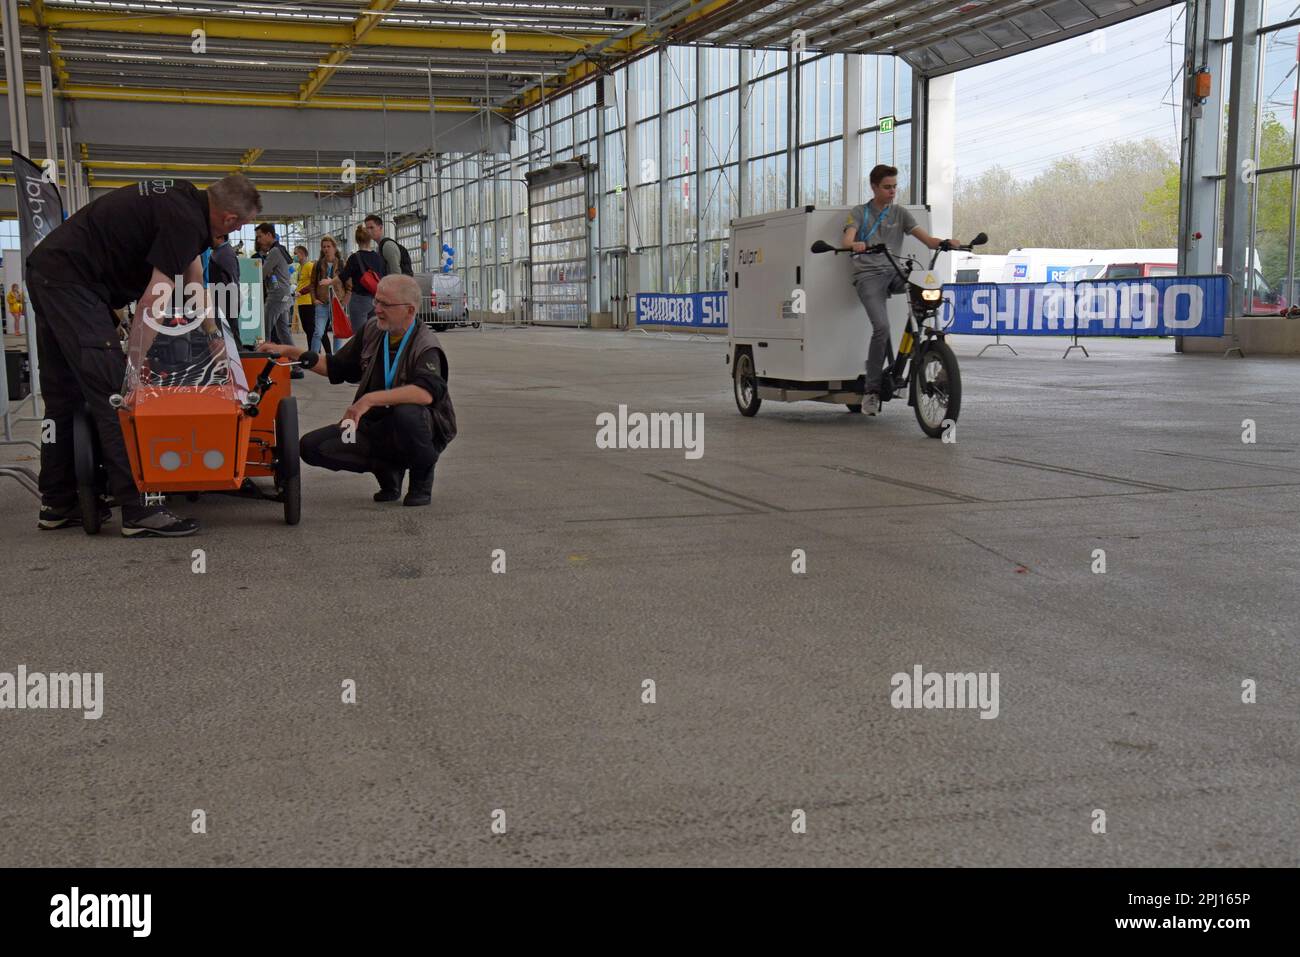 People testing electric assist load carrying bikes on display at the International Cargo Bike Festival, Haarlem, Netherlands, Nov 2022 Stock Photo